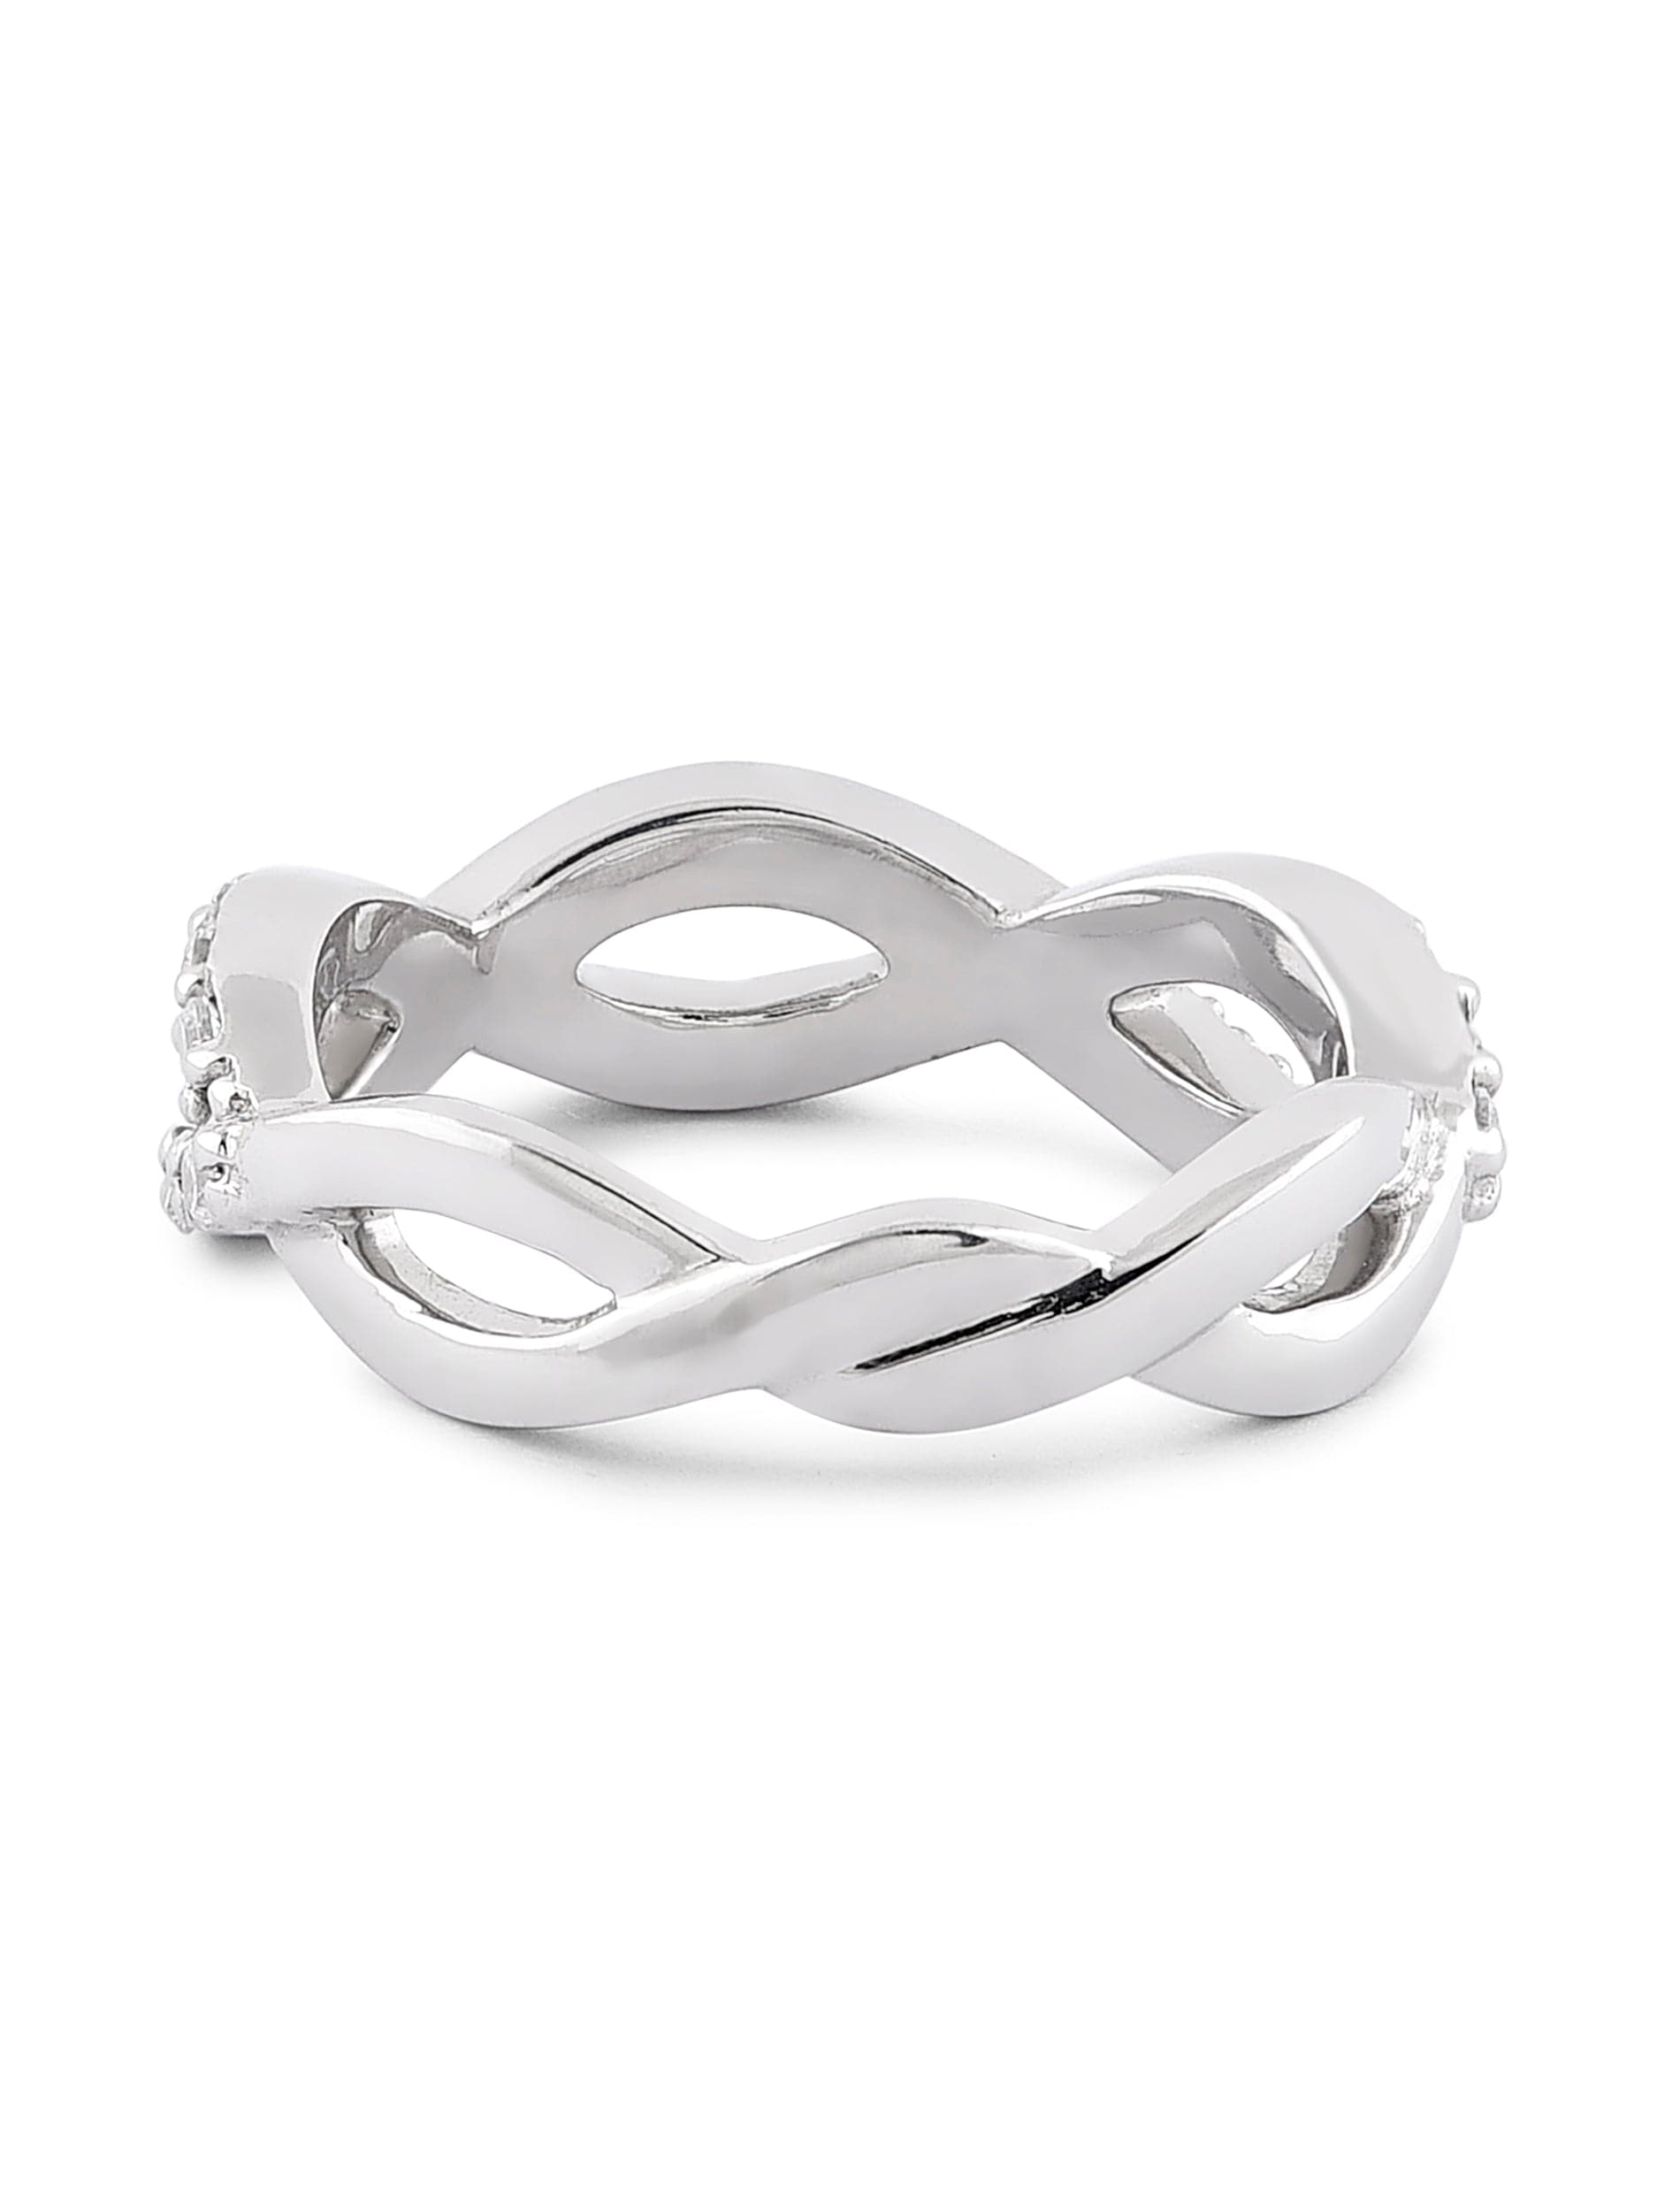 Tiffany Infinity narrow band ring in sterling silver | Tiffany & Co.